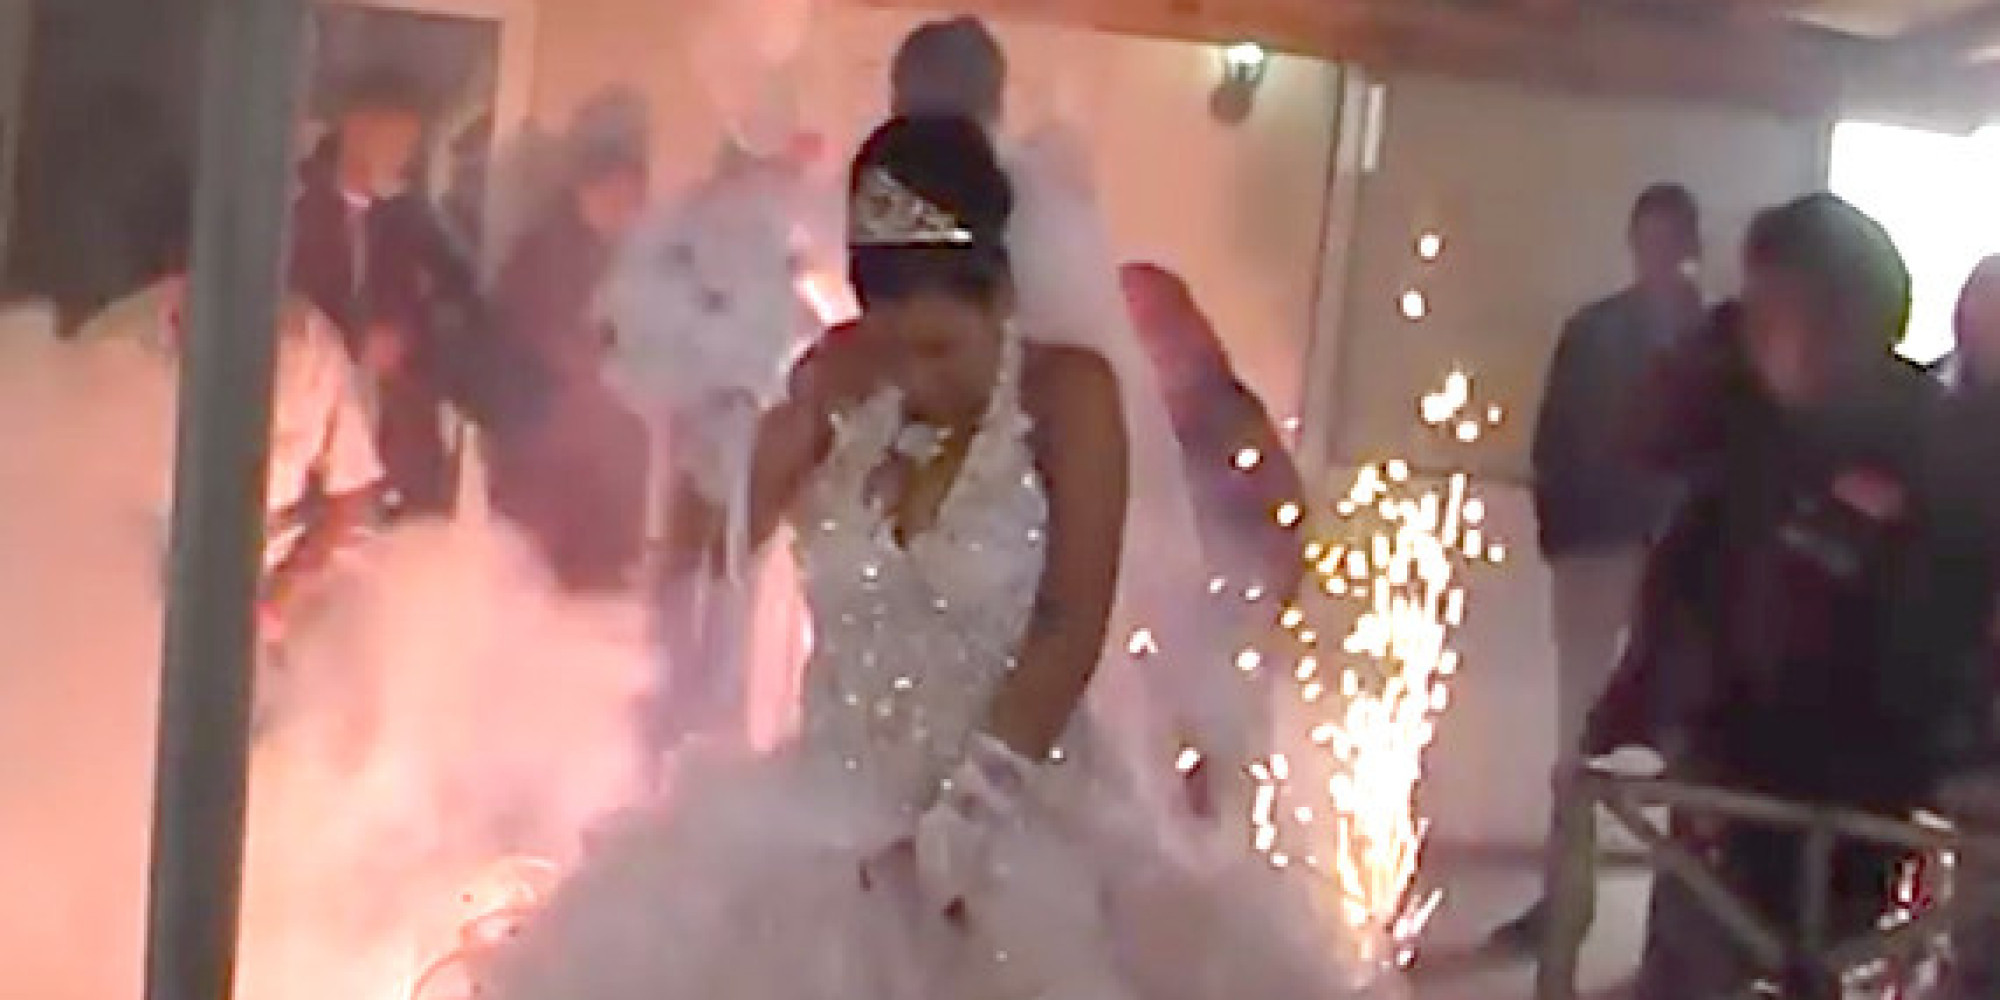 Wedding Sparklers Canada
 This Is Why Indoor Fireworks And Weddings Should NEVER Mix